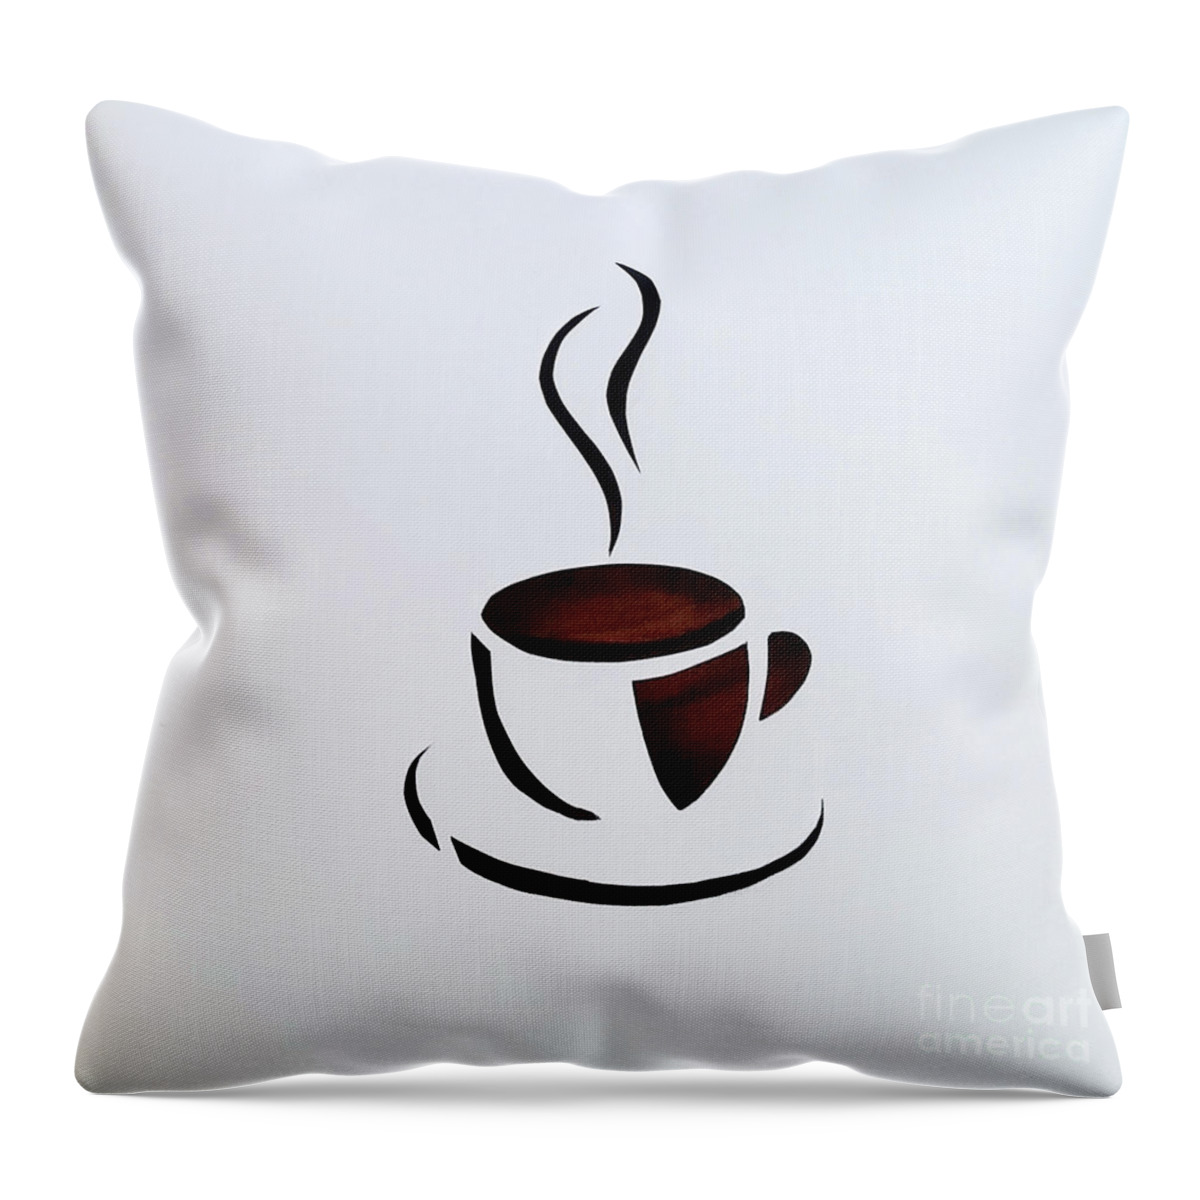 Cut Canvas Throw Pillow featuring the mixed media Cuppa by Phyllis Howard